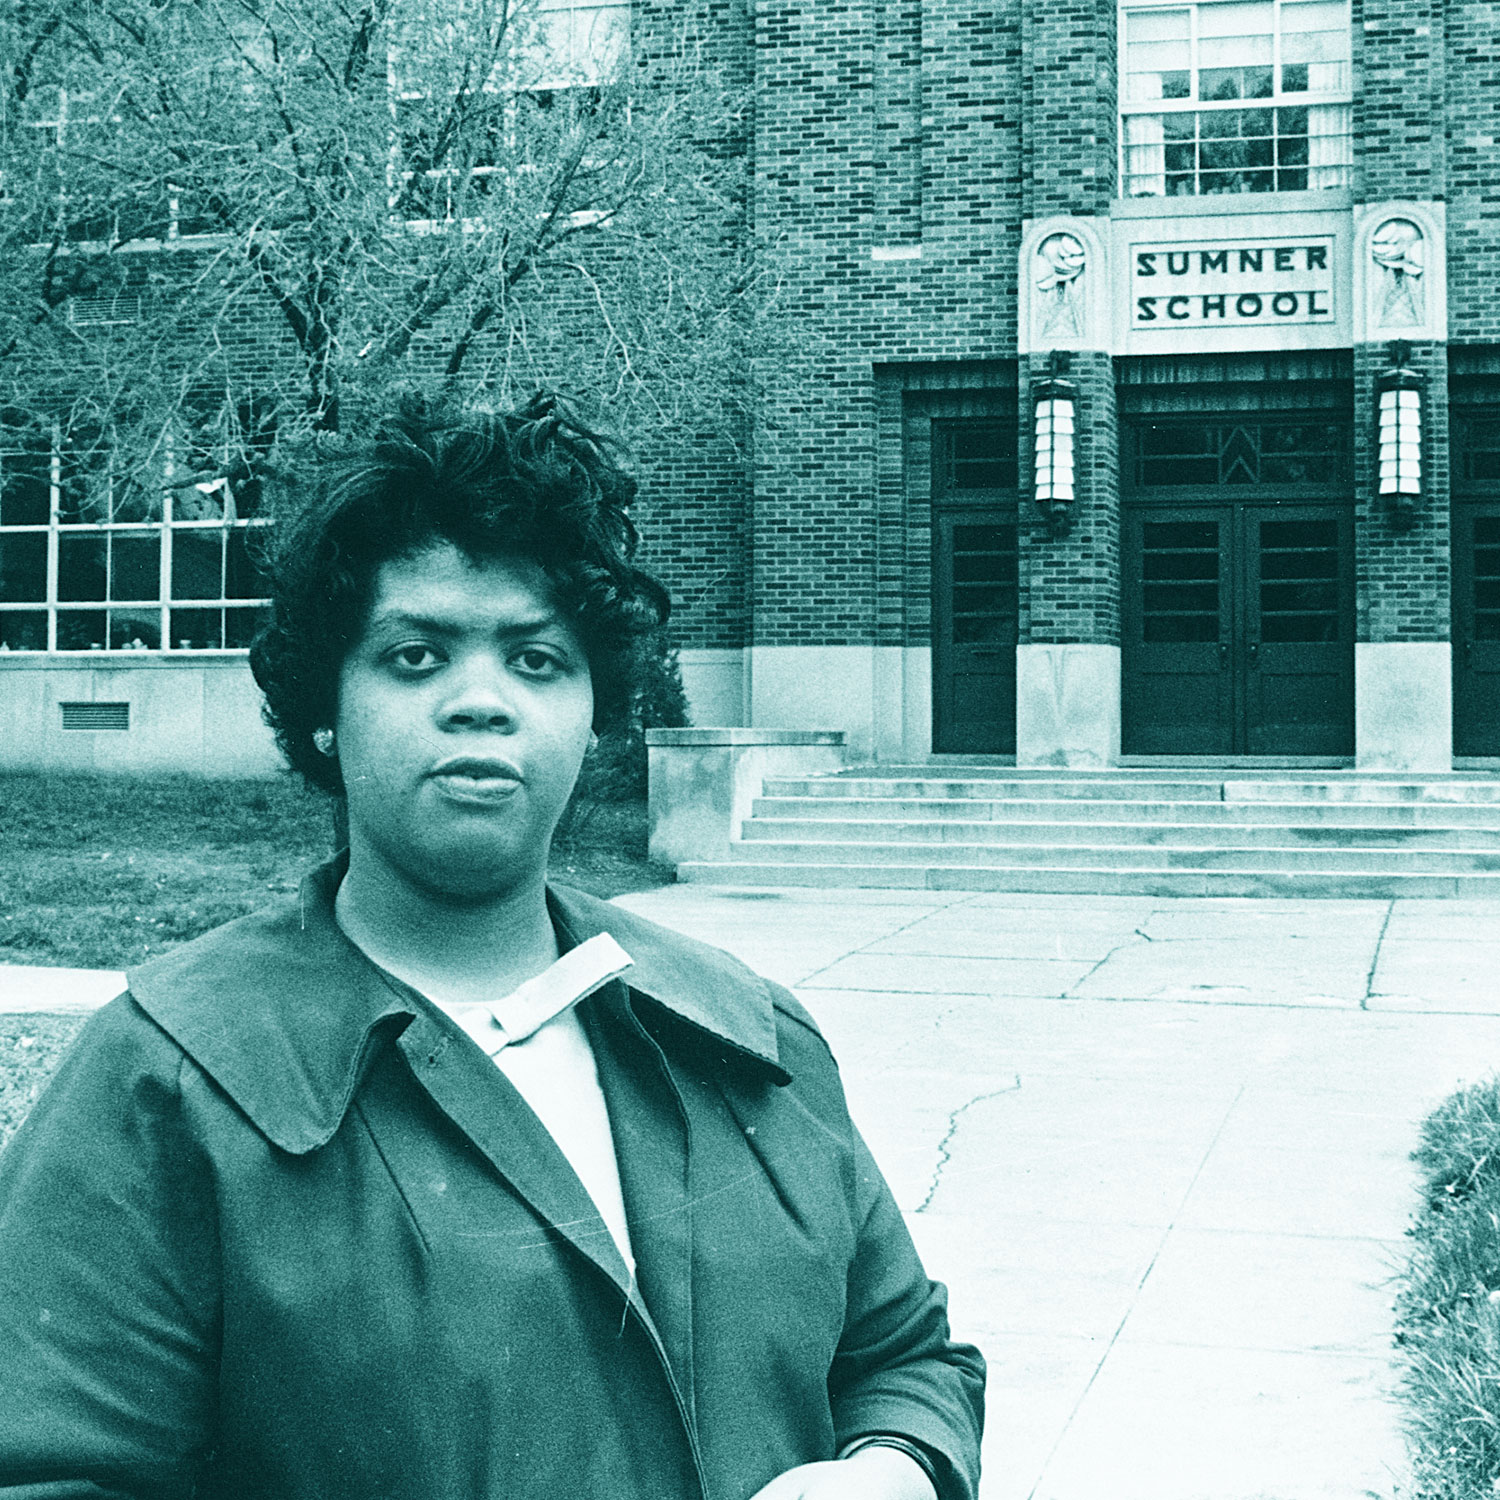 The complicated story of Linda Brown and the fight for desegregated schools